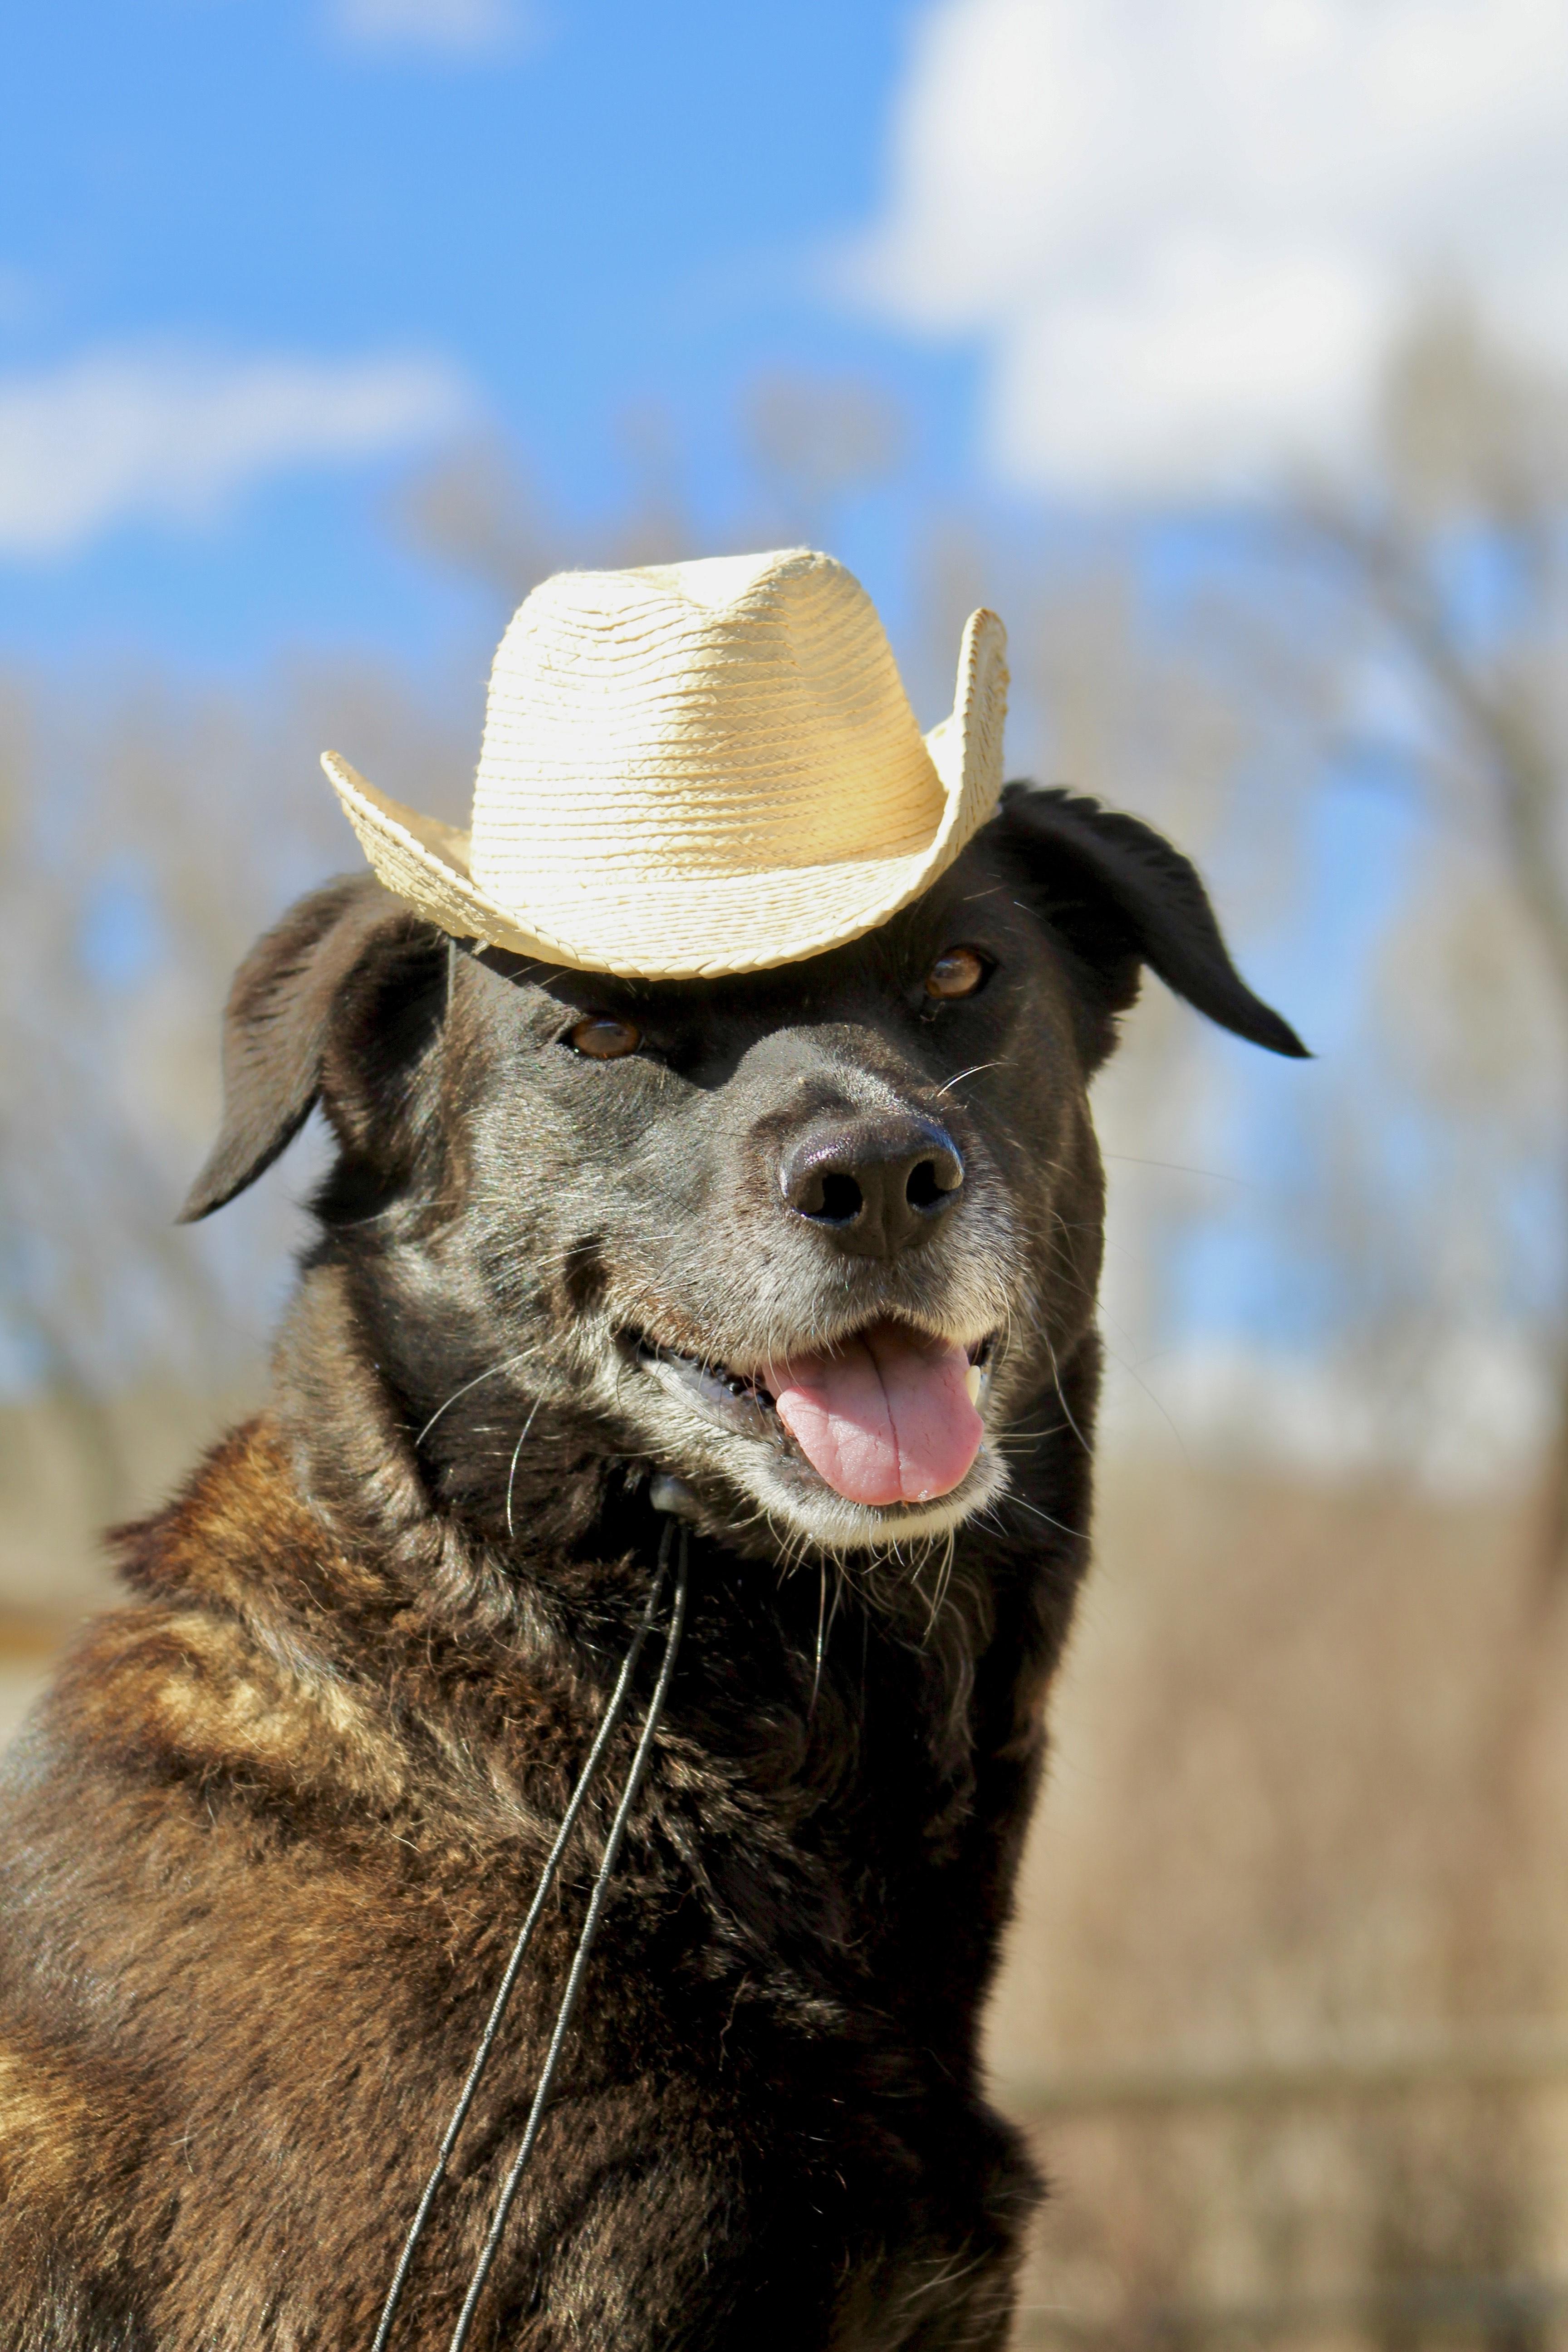 Black brown medium size dog poses with his tongue out wearing a straw cowboy hat outdoors.